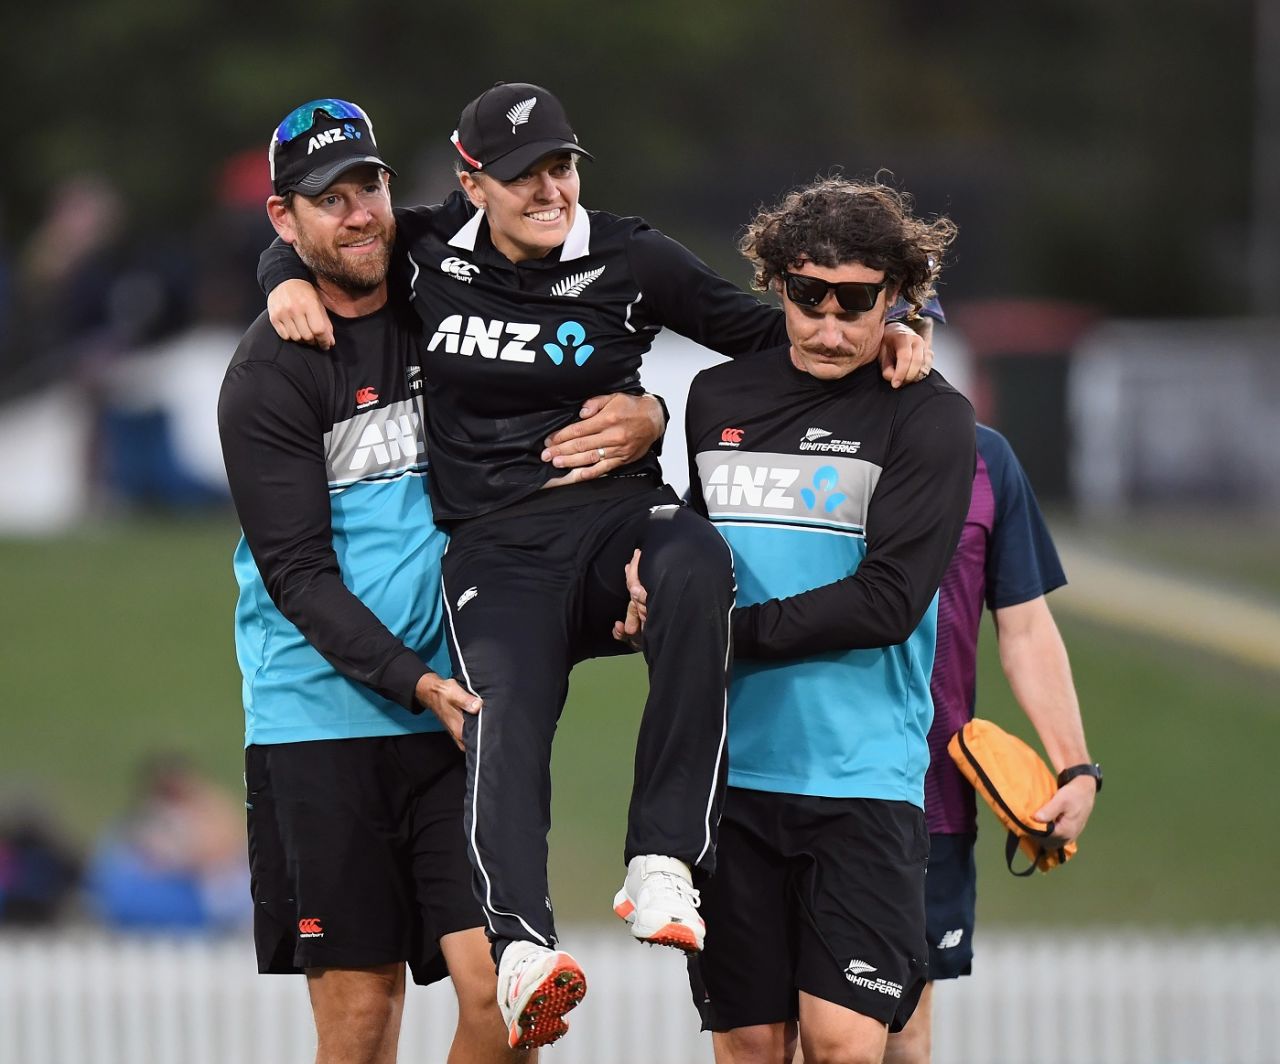 New Zealand bowling coach Jacob Oram (L) helps Lea Tahuhu off the field after she sustained a hamstring injury late in the game, New Zealand Women vs England Women, Christchurch, February 23, 2021